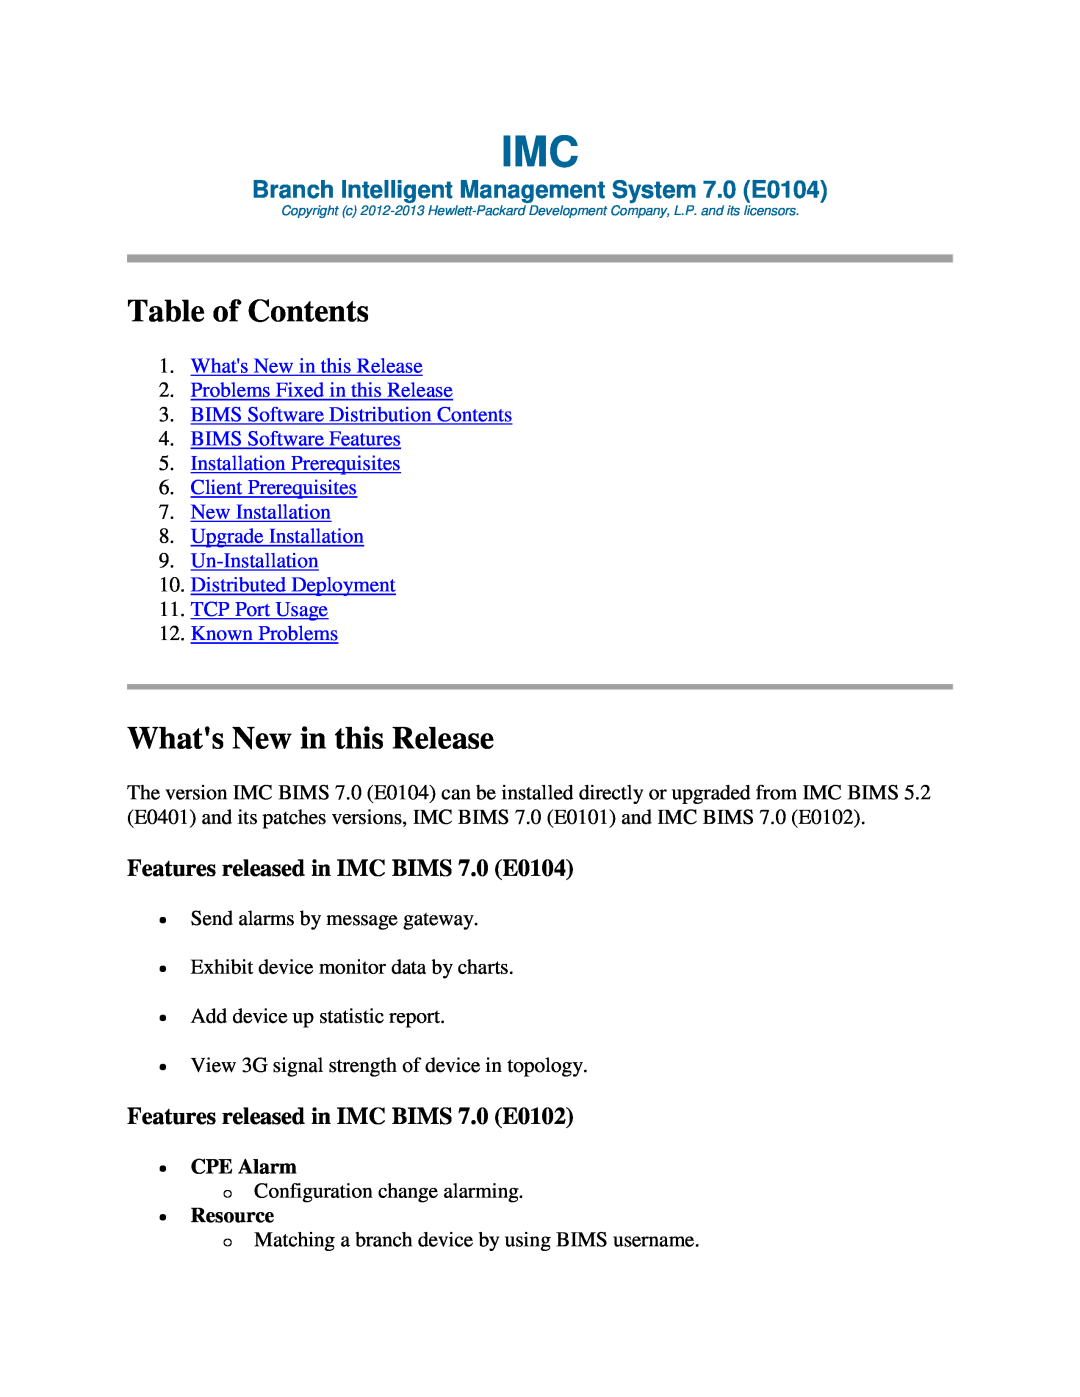 HP Branch Intellectual Management System Software manual Table of Contents, Whats New in this Release, ∙ CPE Alarm 